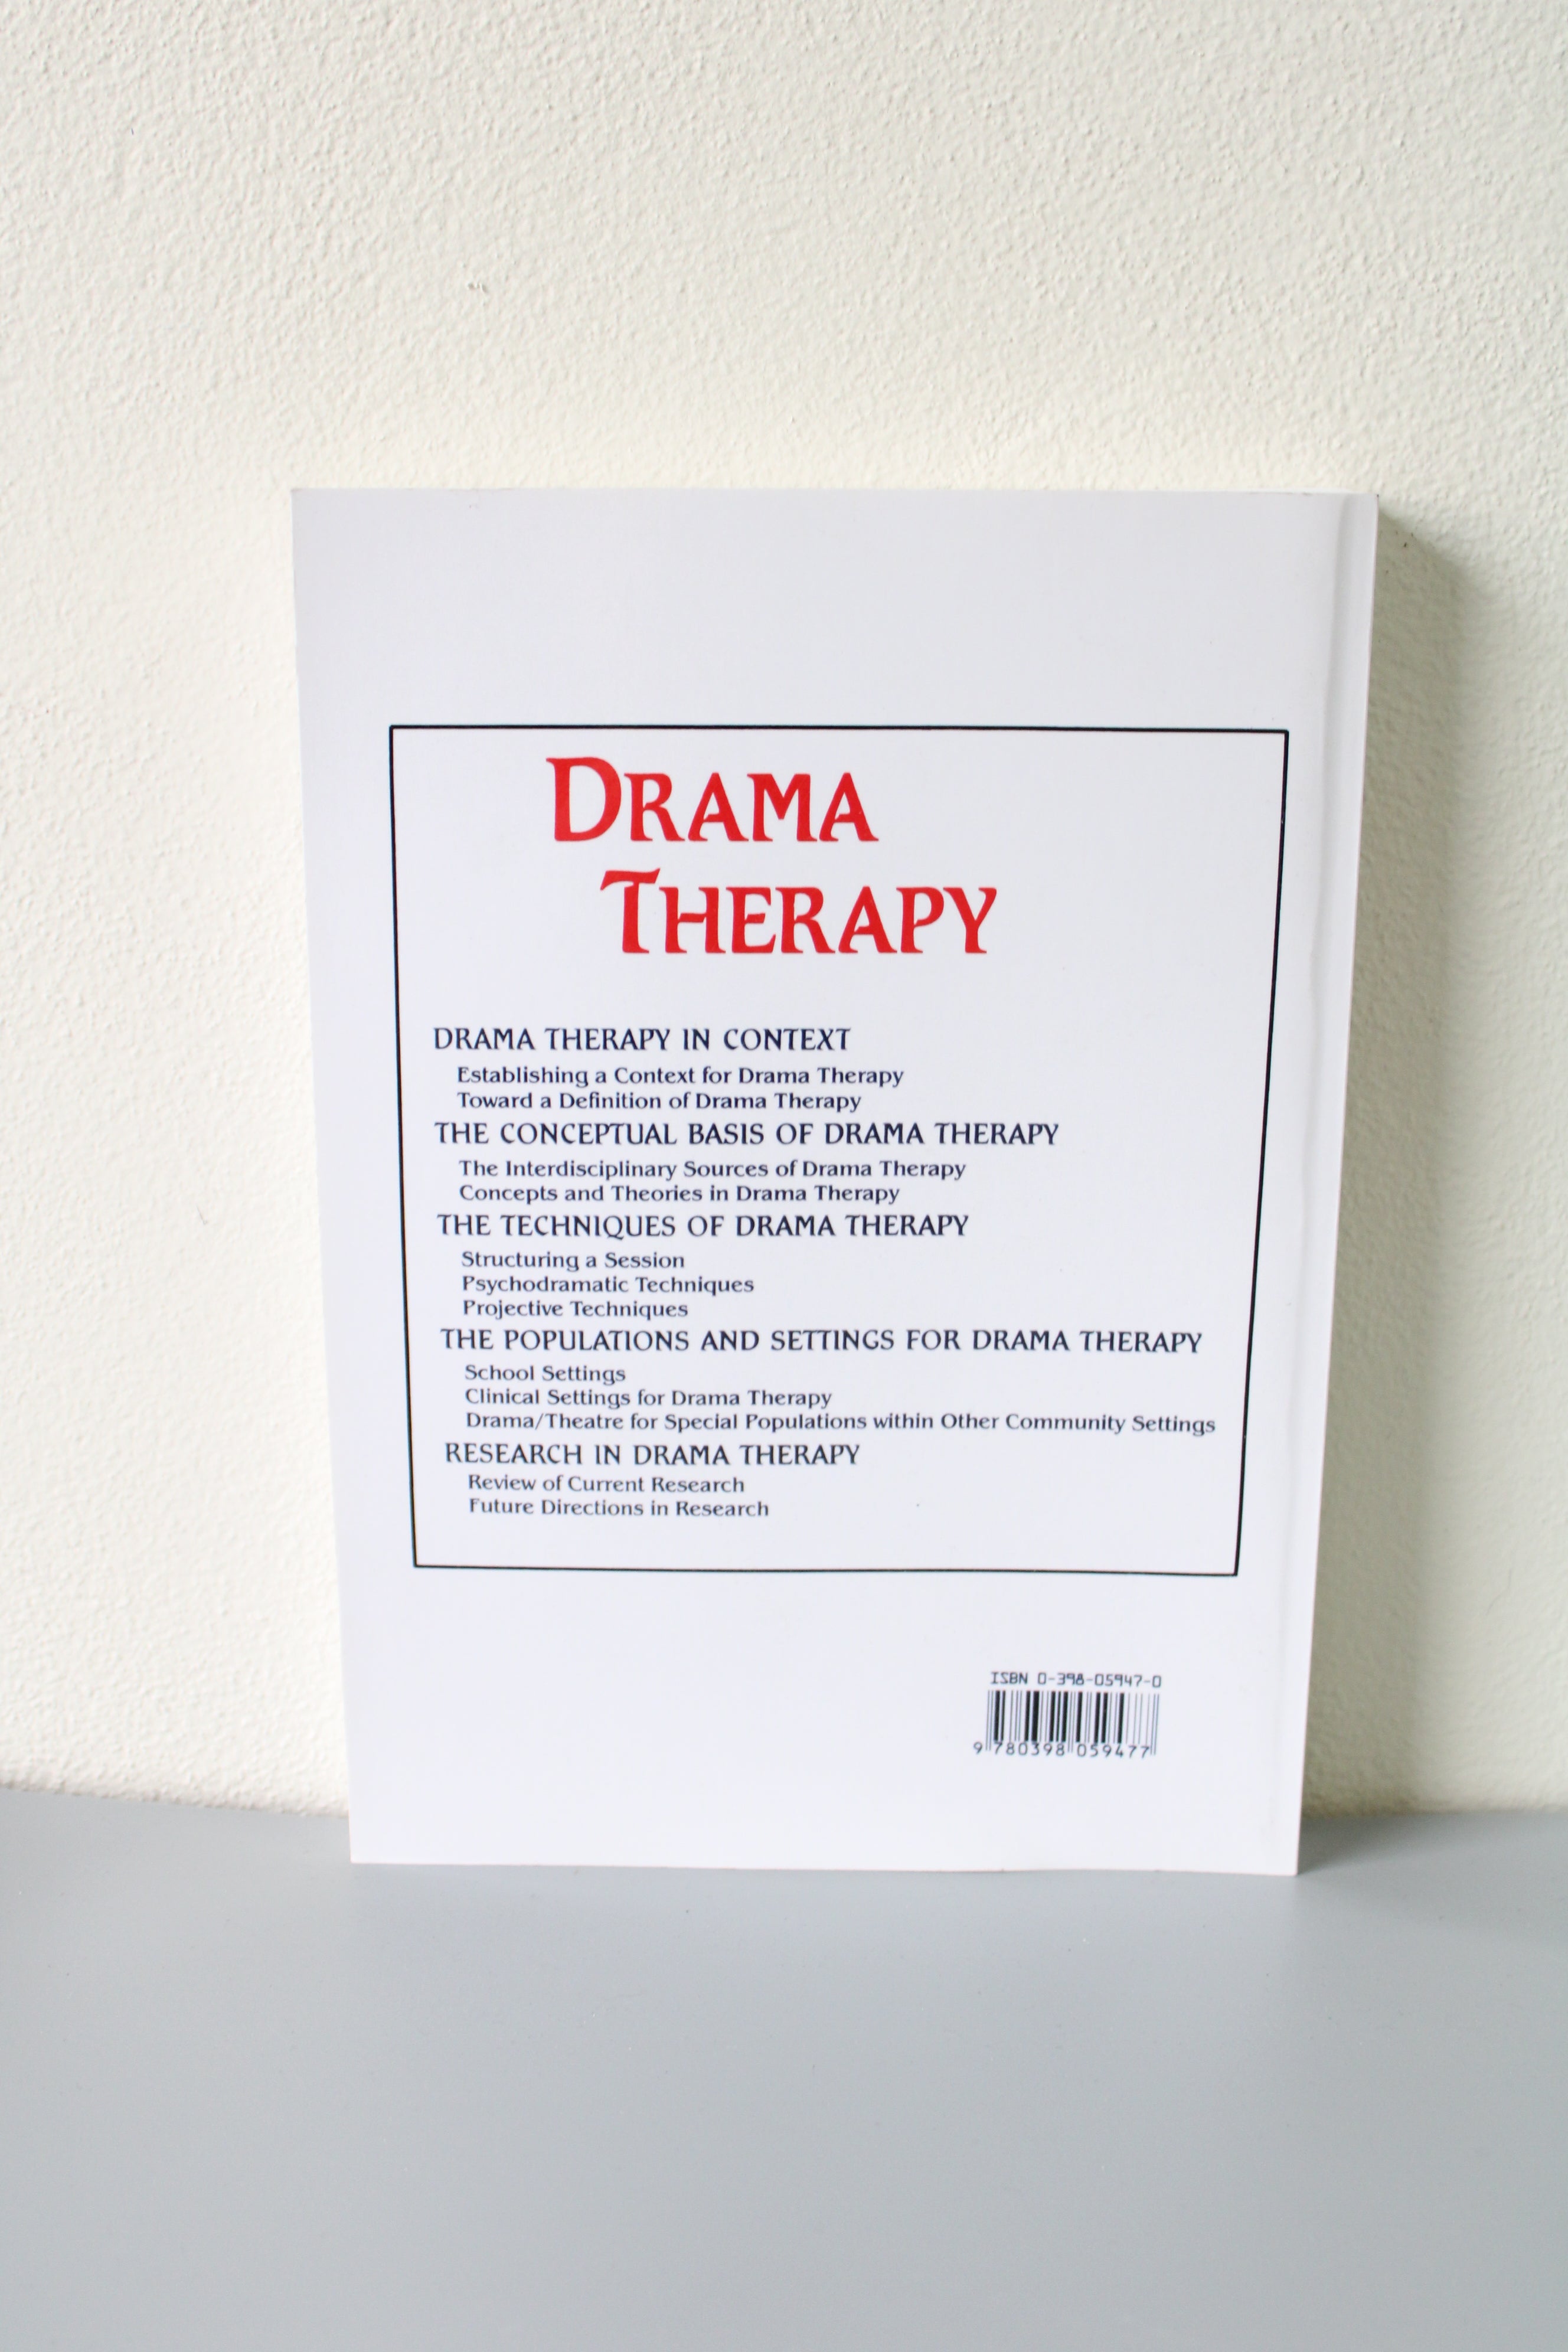 Drama Therapy: Concepts, Theories And Practices